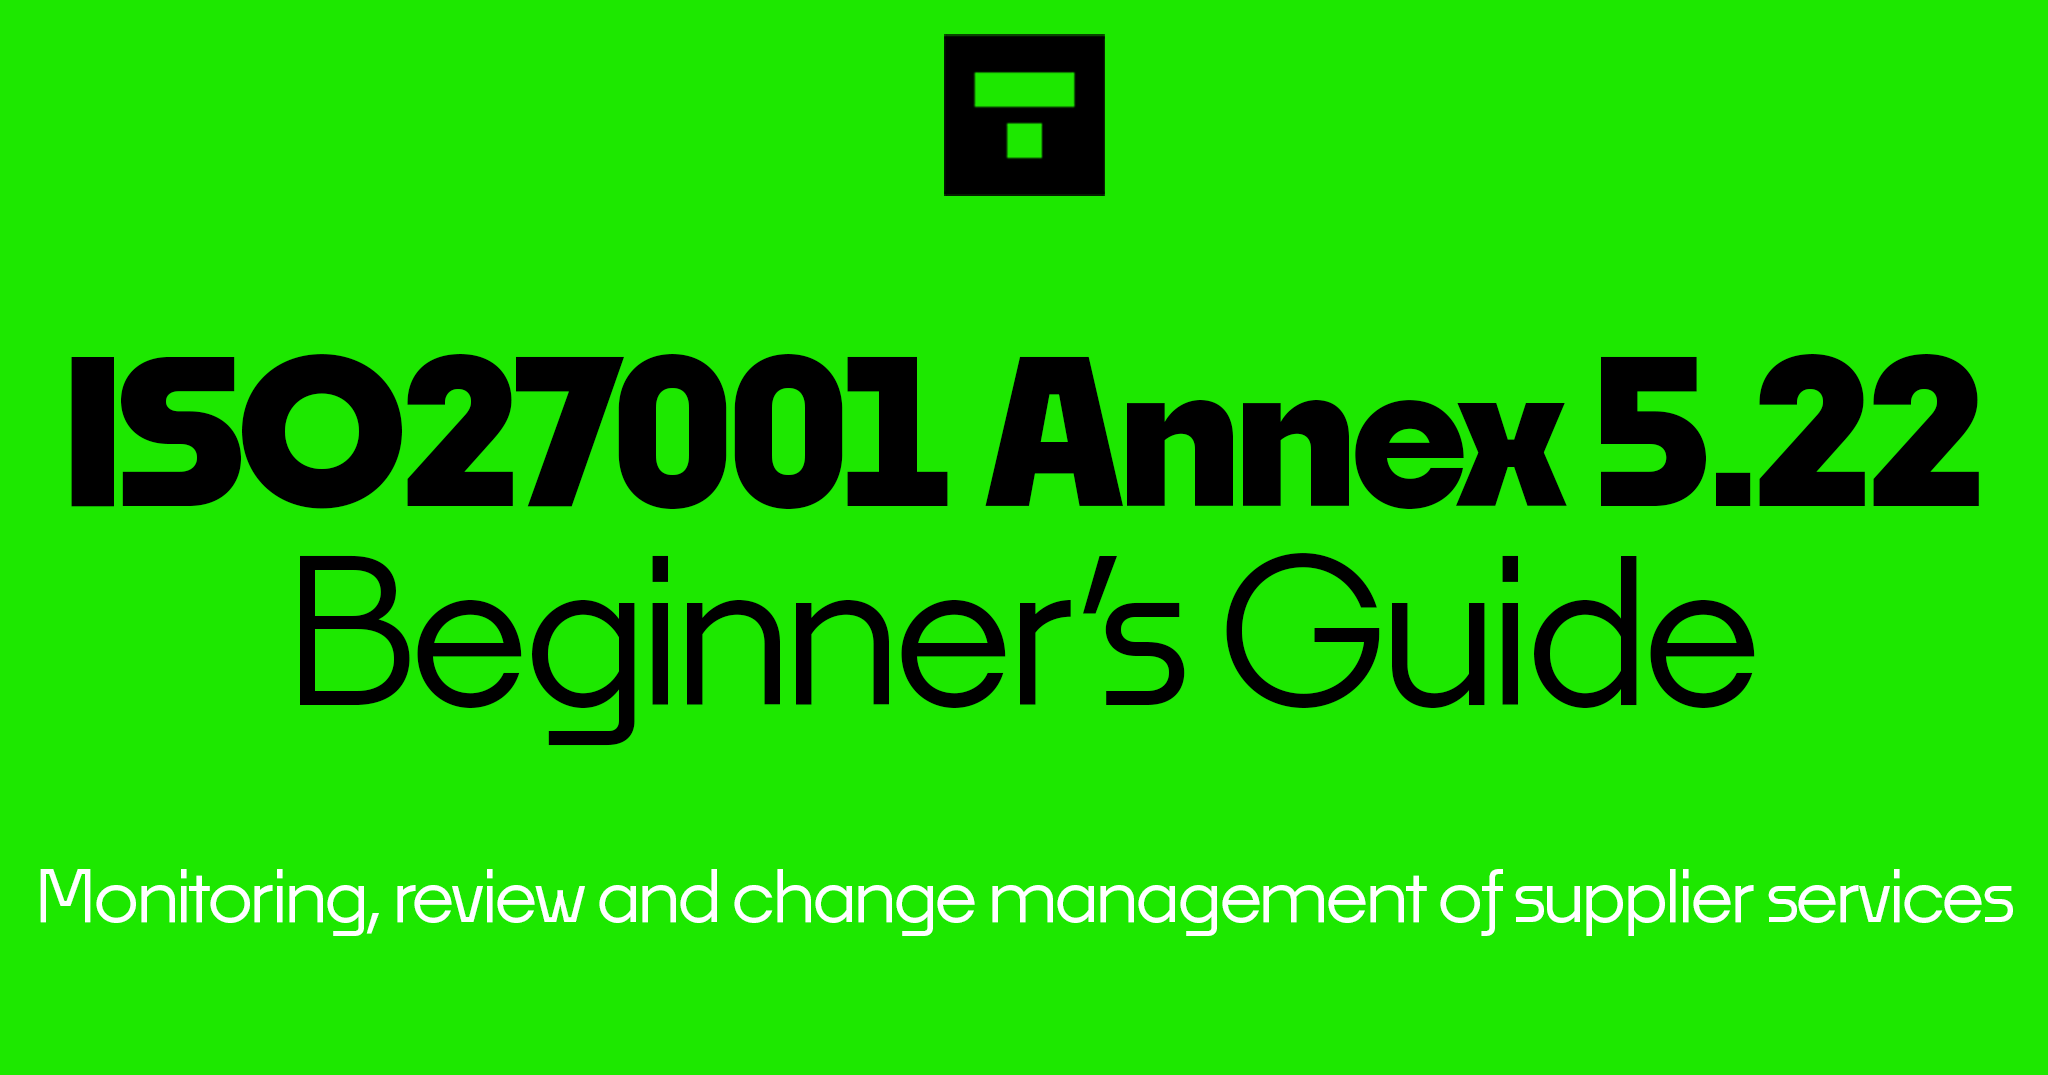 How To Implement ISO 27001 Annex A 5.22 Monitor, Review And Change Management Of Supplier Services